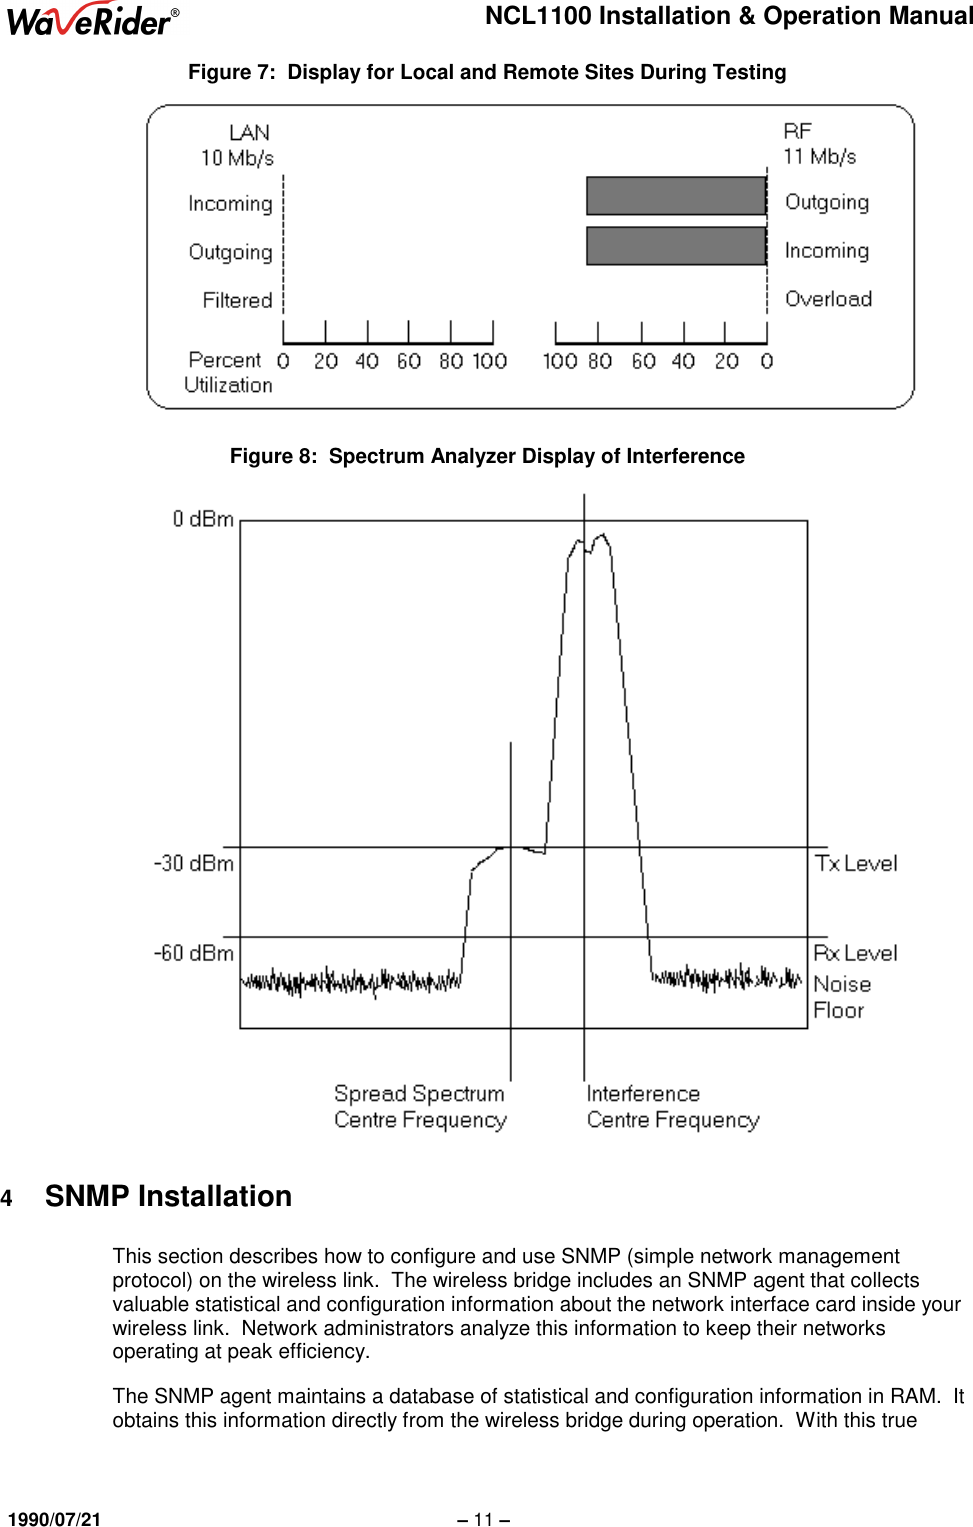 NCL1100 Installation &amp; Operation Manual1990/07/21 – 11 –Figure 7:  Display for Local and Remote Sites During TestingFigure 8:  Spectrum Analyzer Display of Interference4  SNMP InstallationThis section describes how to configure and use SNMP (simple network managementprotocol) on the wireless link.  The wireless bridge includes an SNMP agent that collectsvaluable statistical and configuration information about the network interface card inside yourwireless link.  Network administrators analyze this information to keep their networksoperating at peak efficiency.The SNMP agent maintains a database of statistical and configuration information in RAM.  Itobtains this information directly from the wireless bridge during operation.  With this true